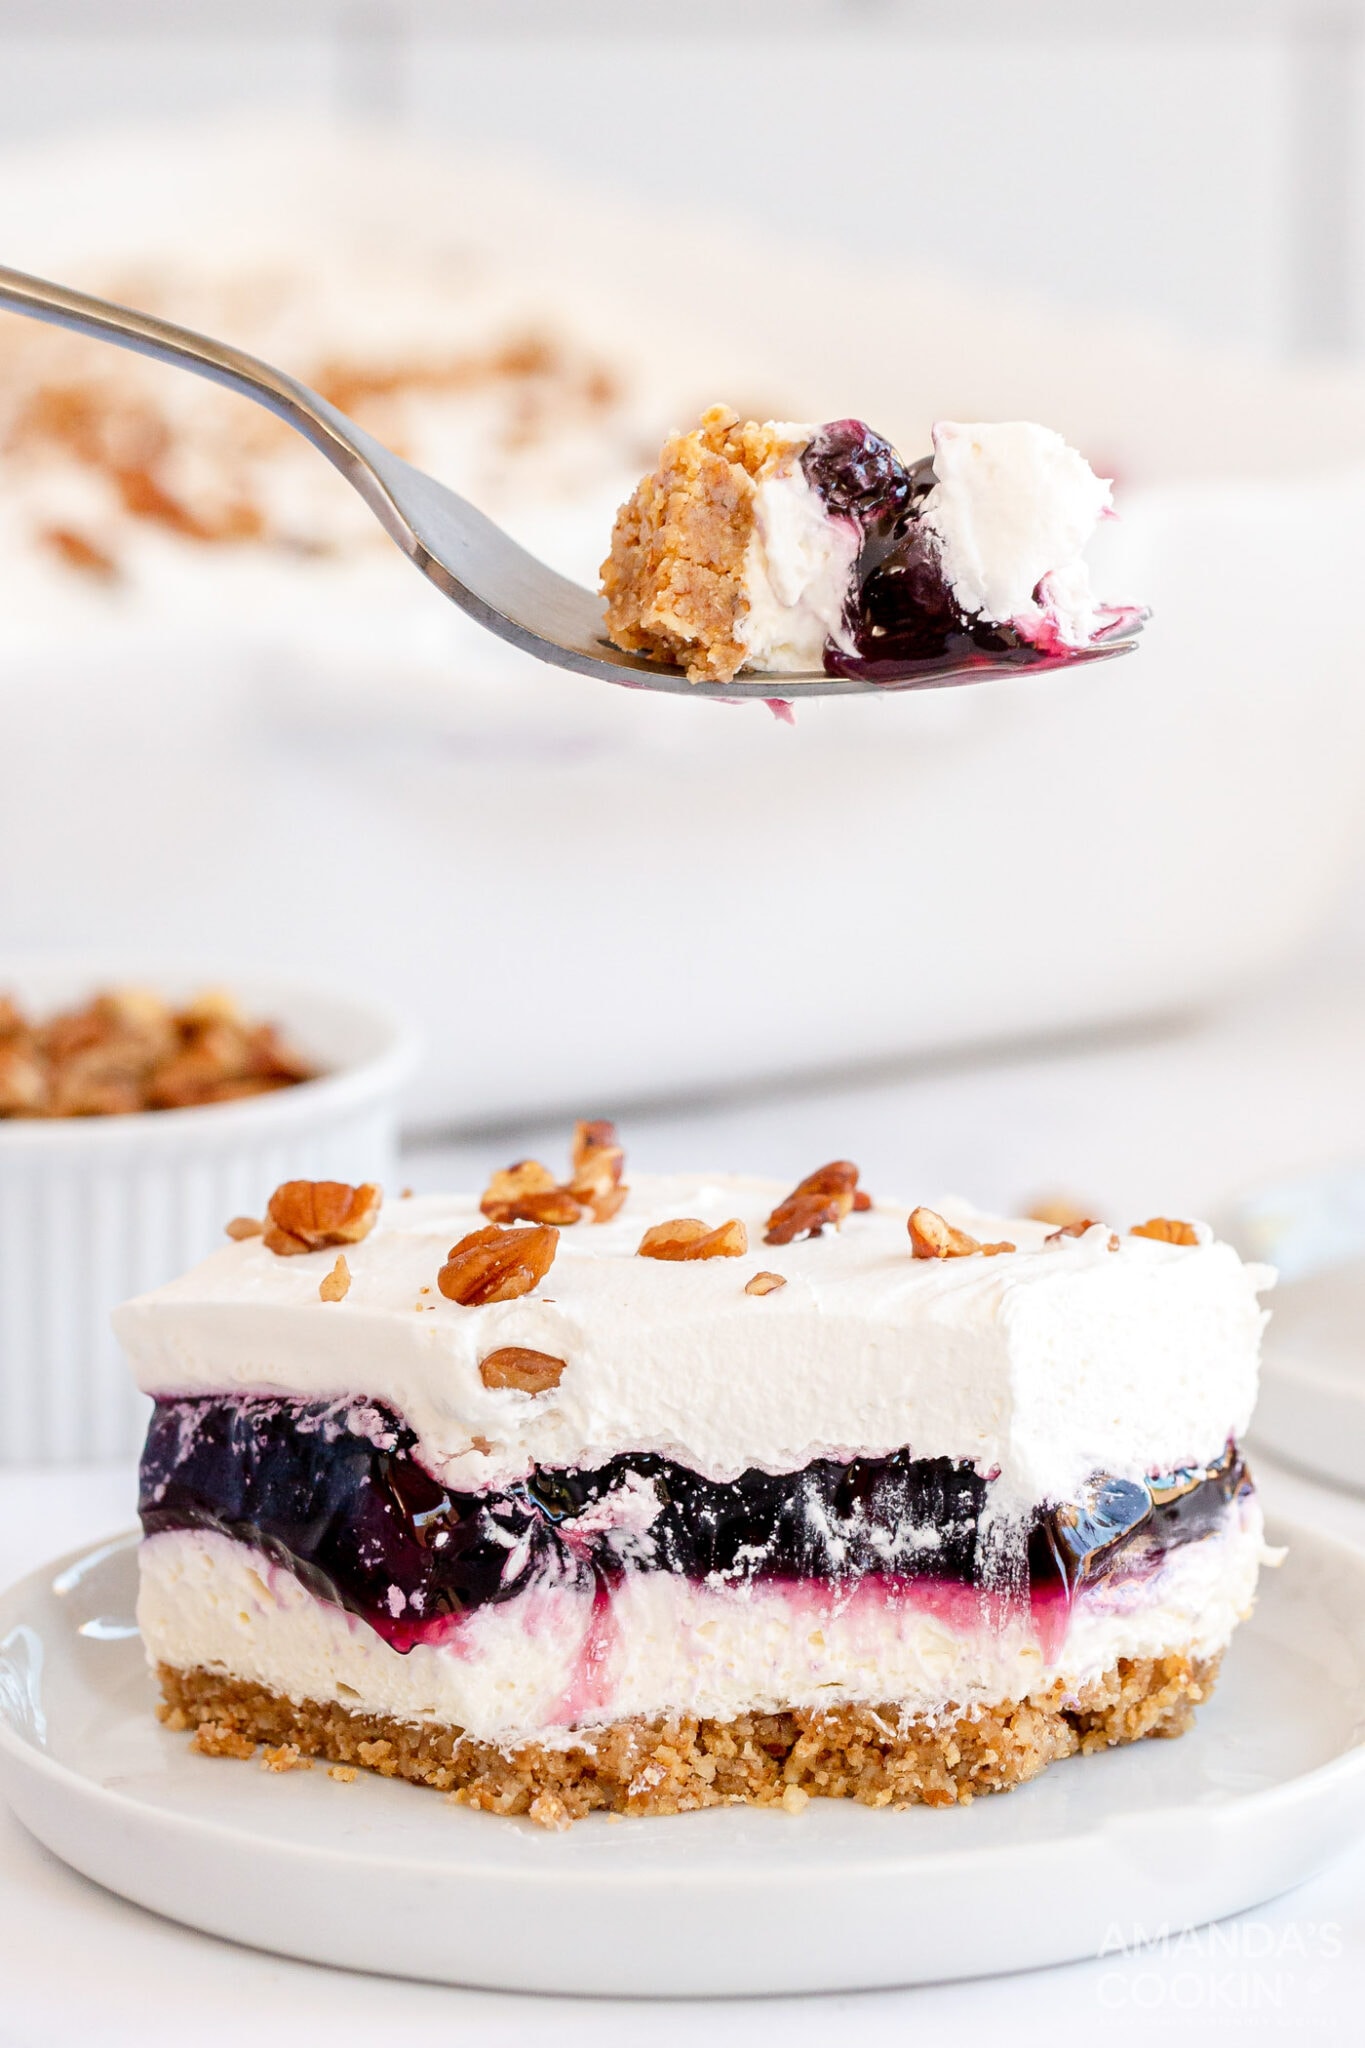 Blueberry Delight - Amanda's Cookin' - One Pan Desserts